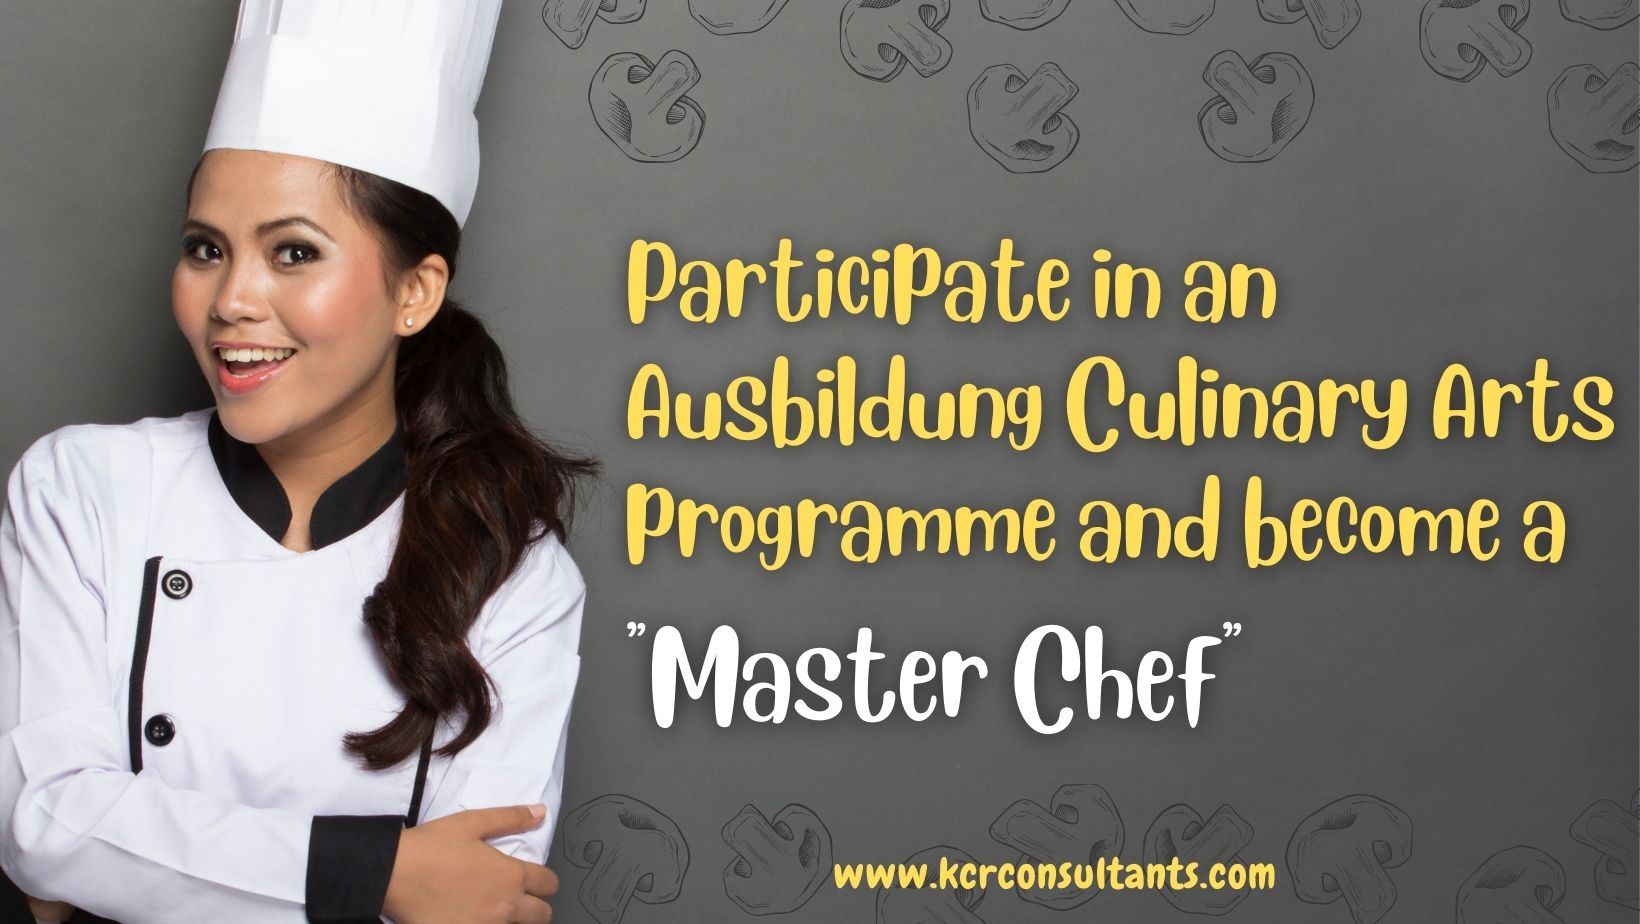 How to become a Chef in Germany through Ausbildung Culinary Arts